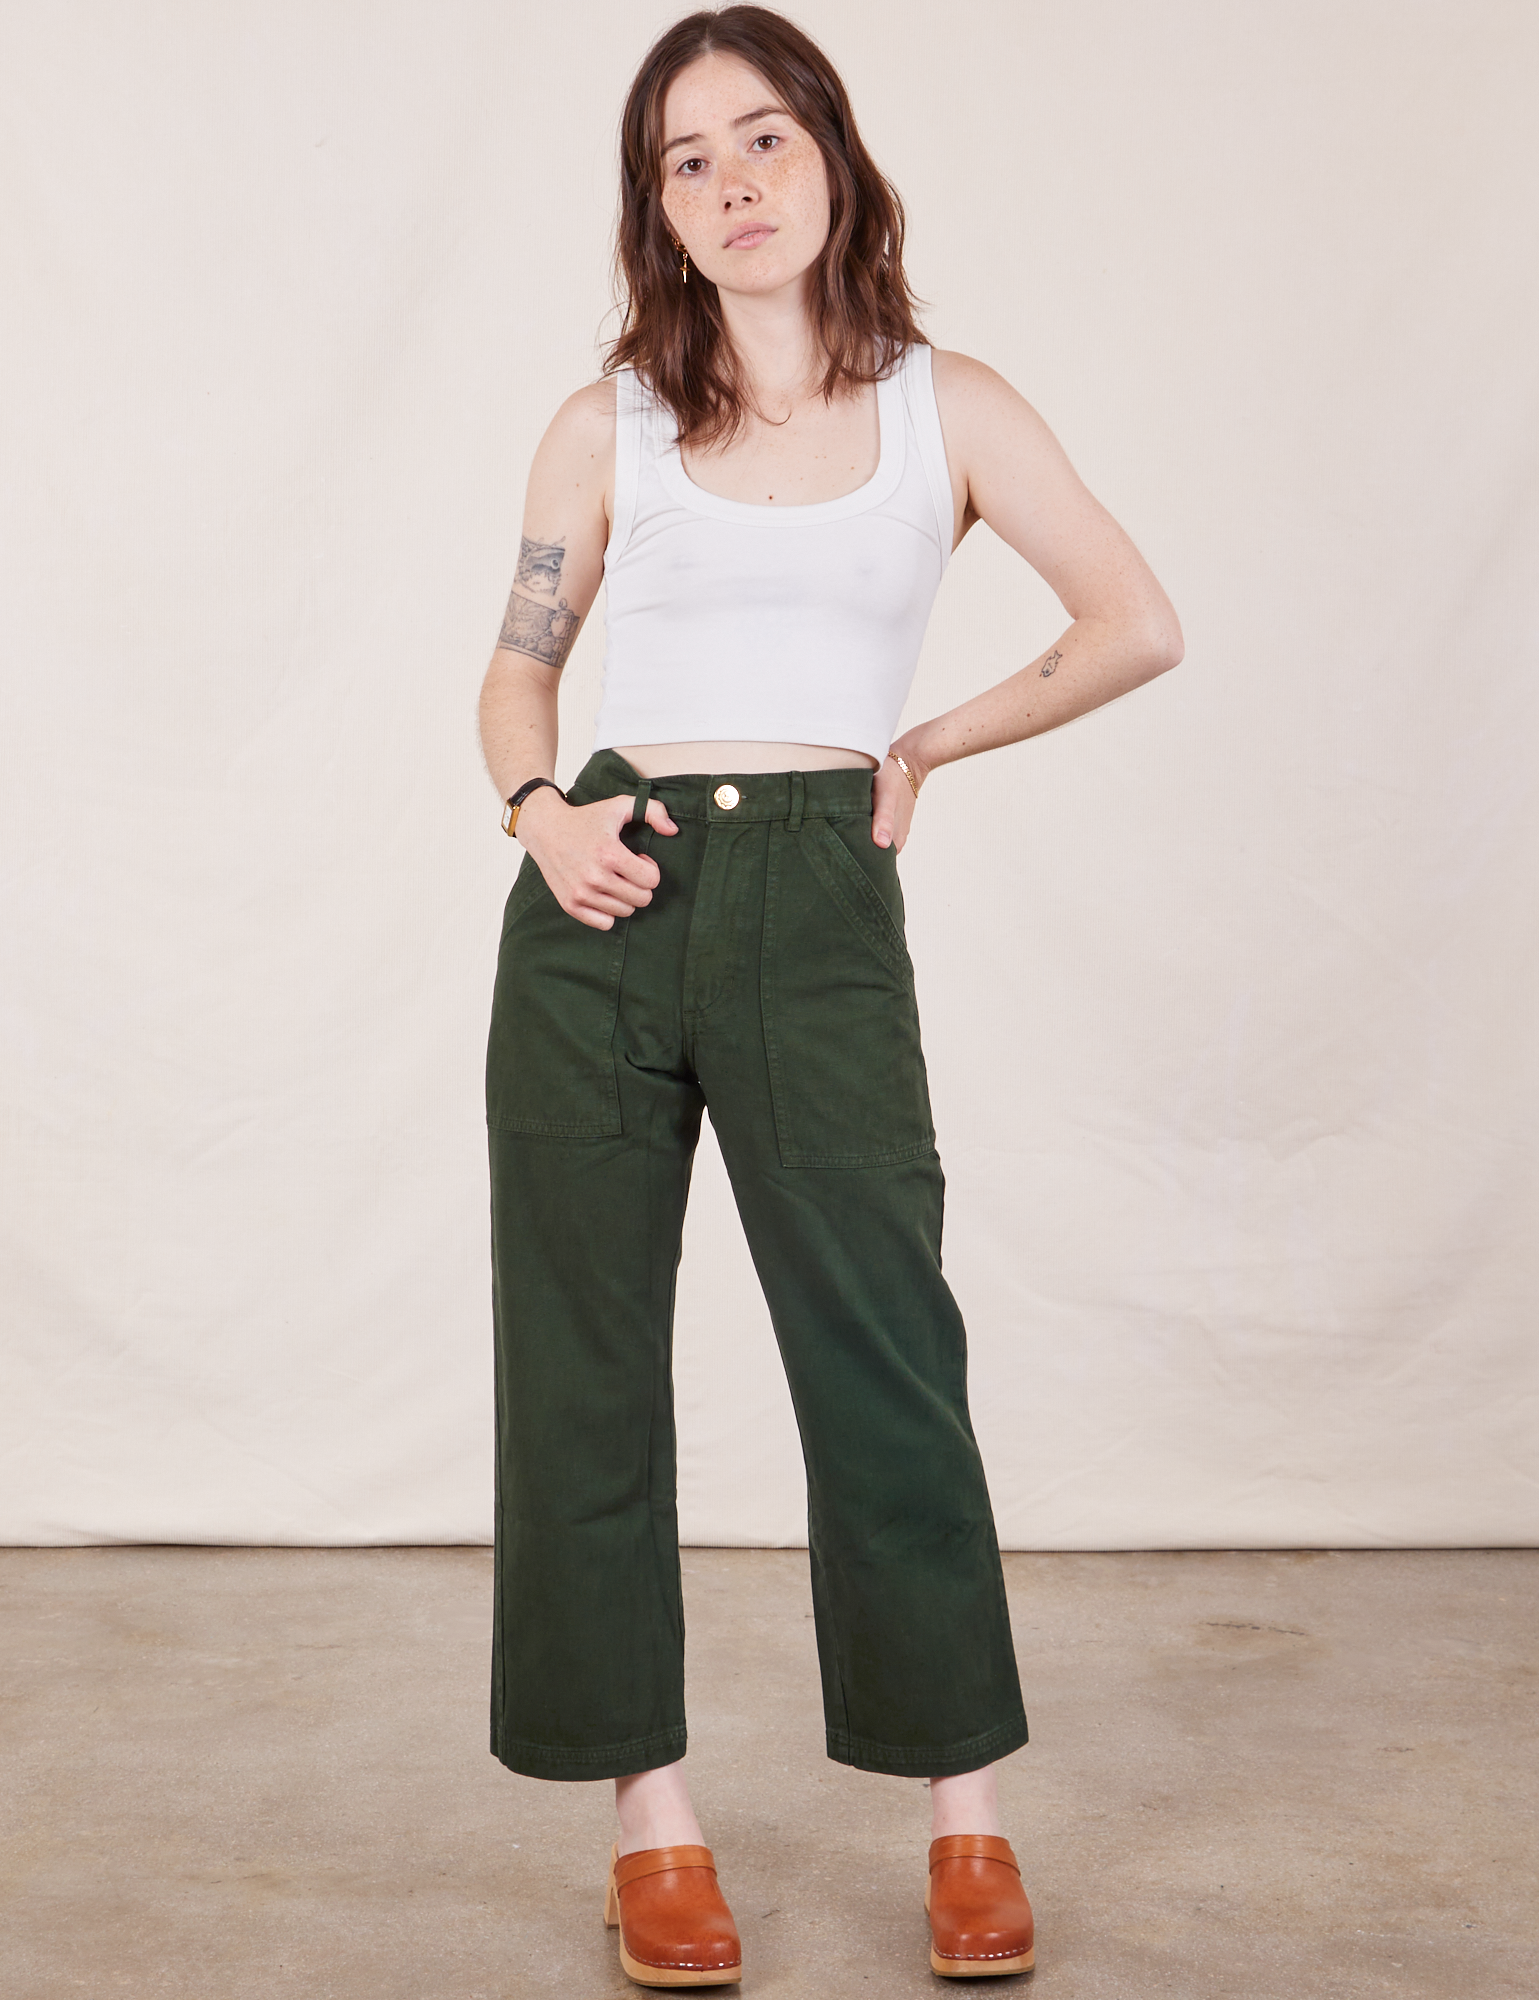 Hana is 5'3" and wearing XXS Petite Work Pants in Swamp Green paired with vintage tee off-white Cropped Tank Top